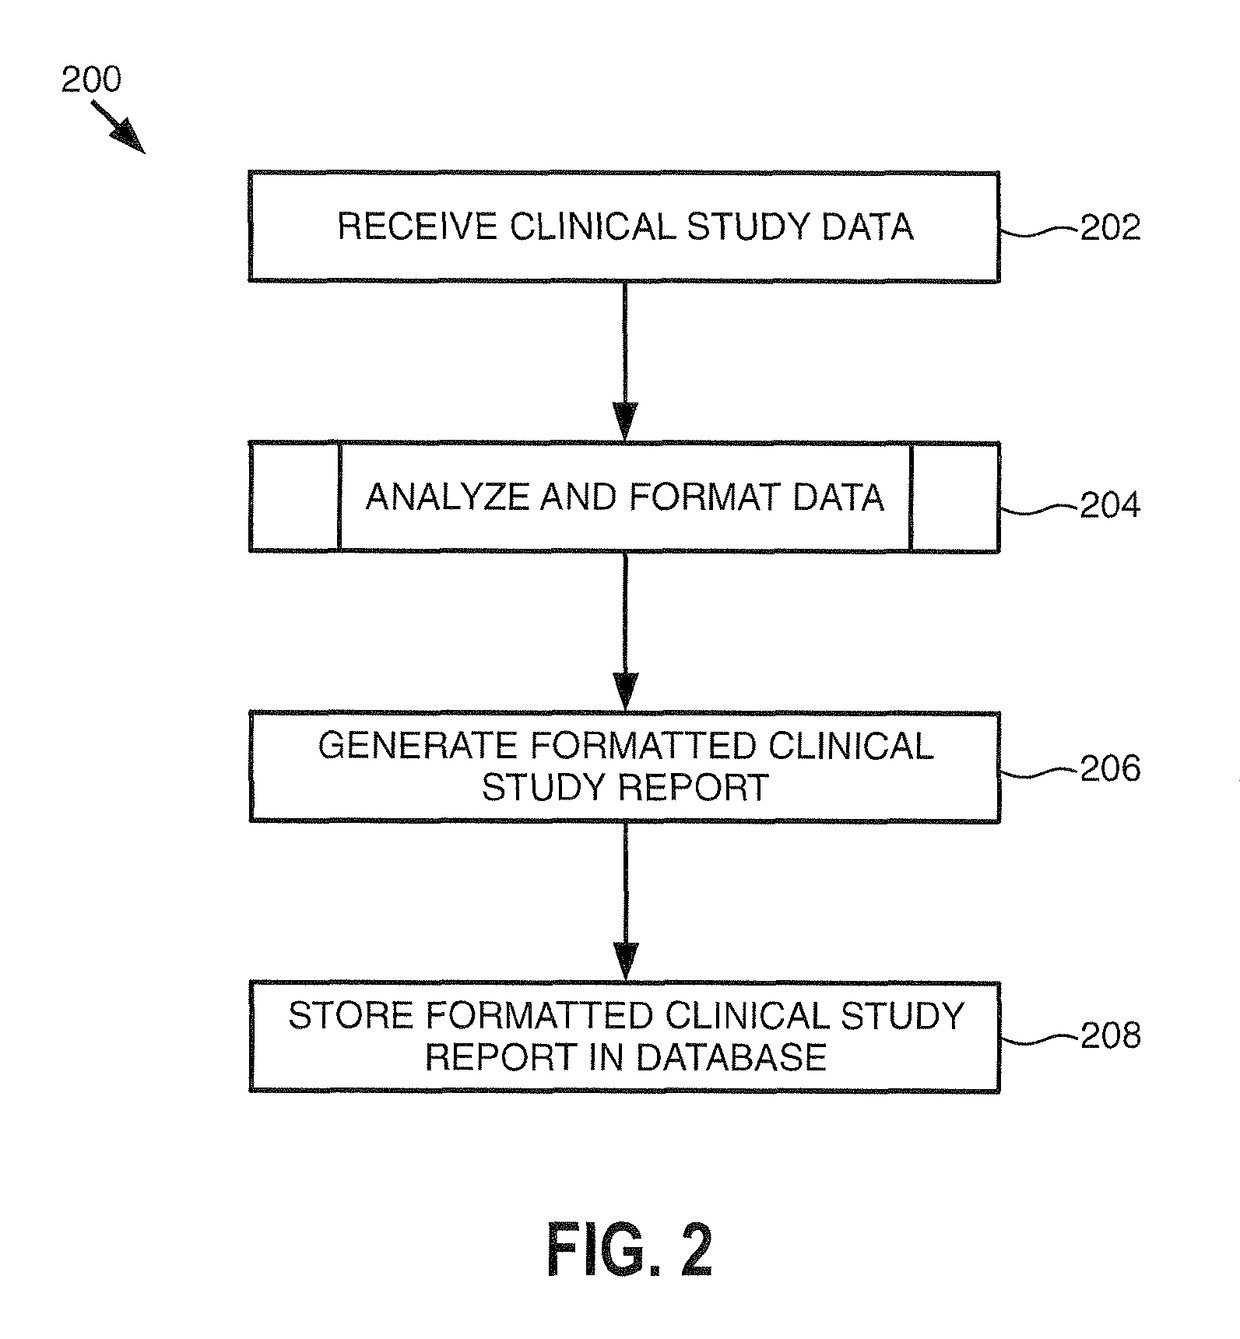 Automatic creation of clinical study reports